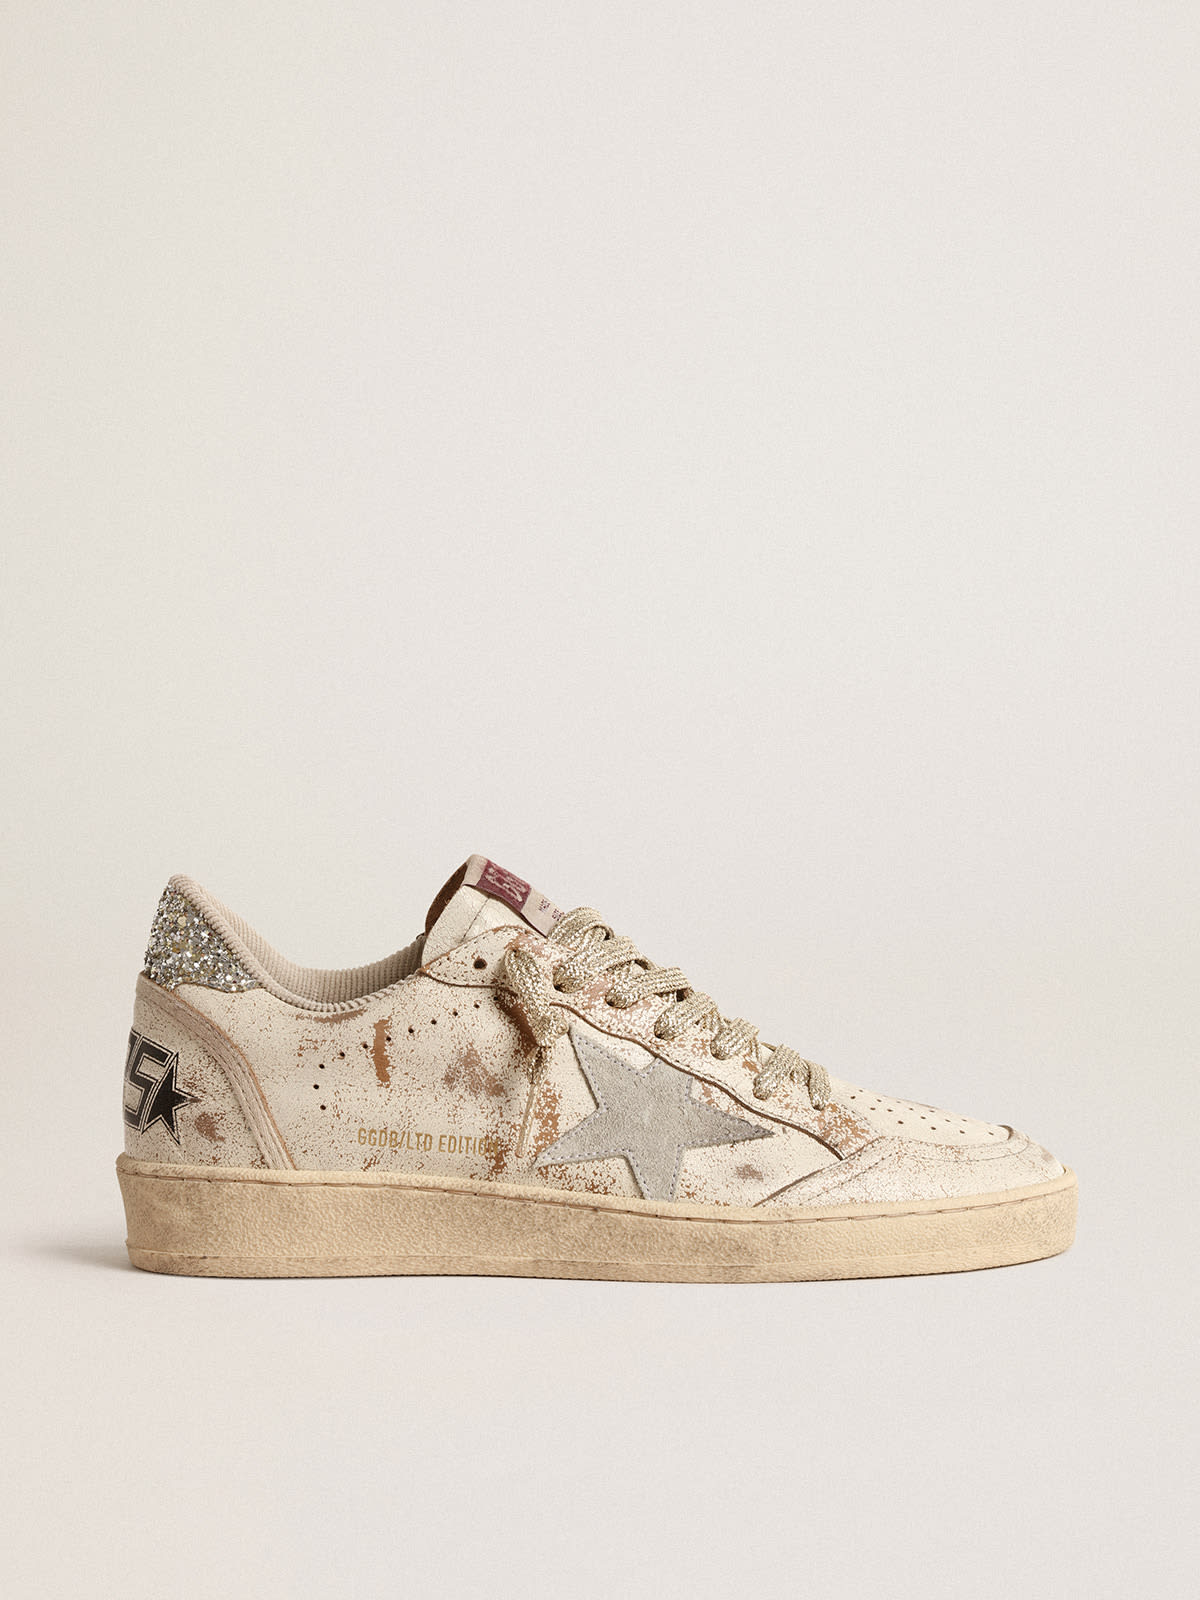 Golden Goose - Ball Star LTD with suede star and platinum glitter heel tab in 